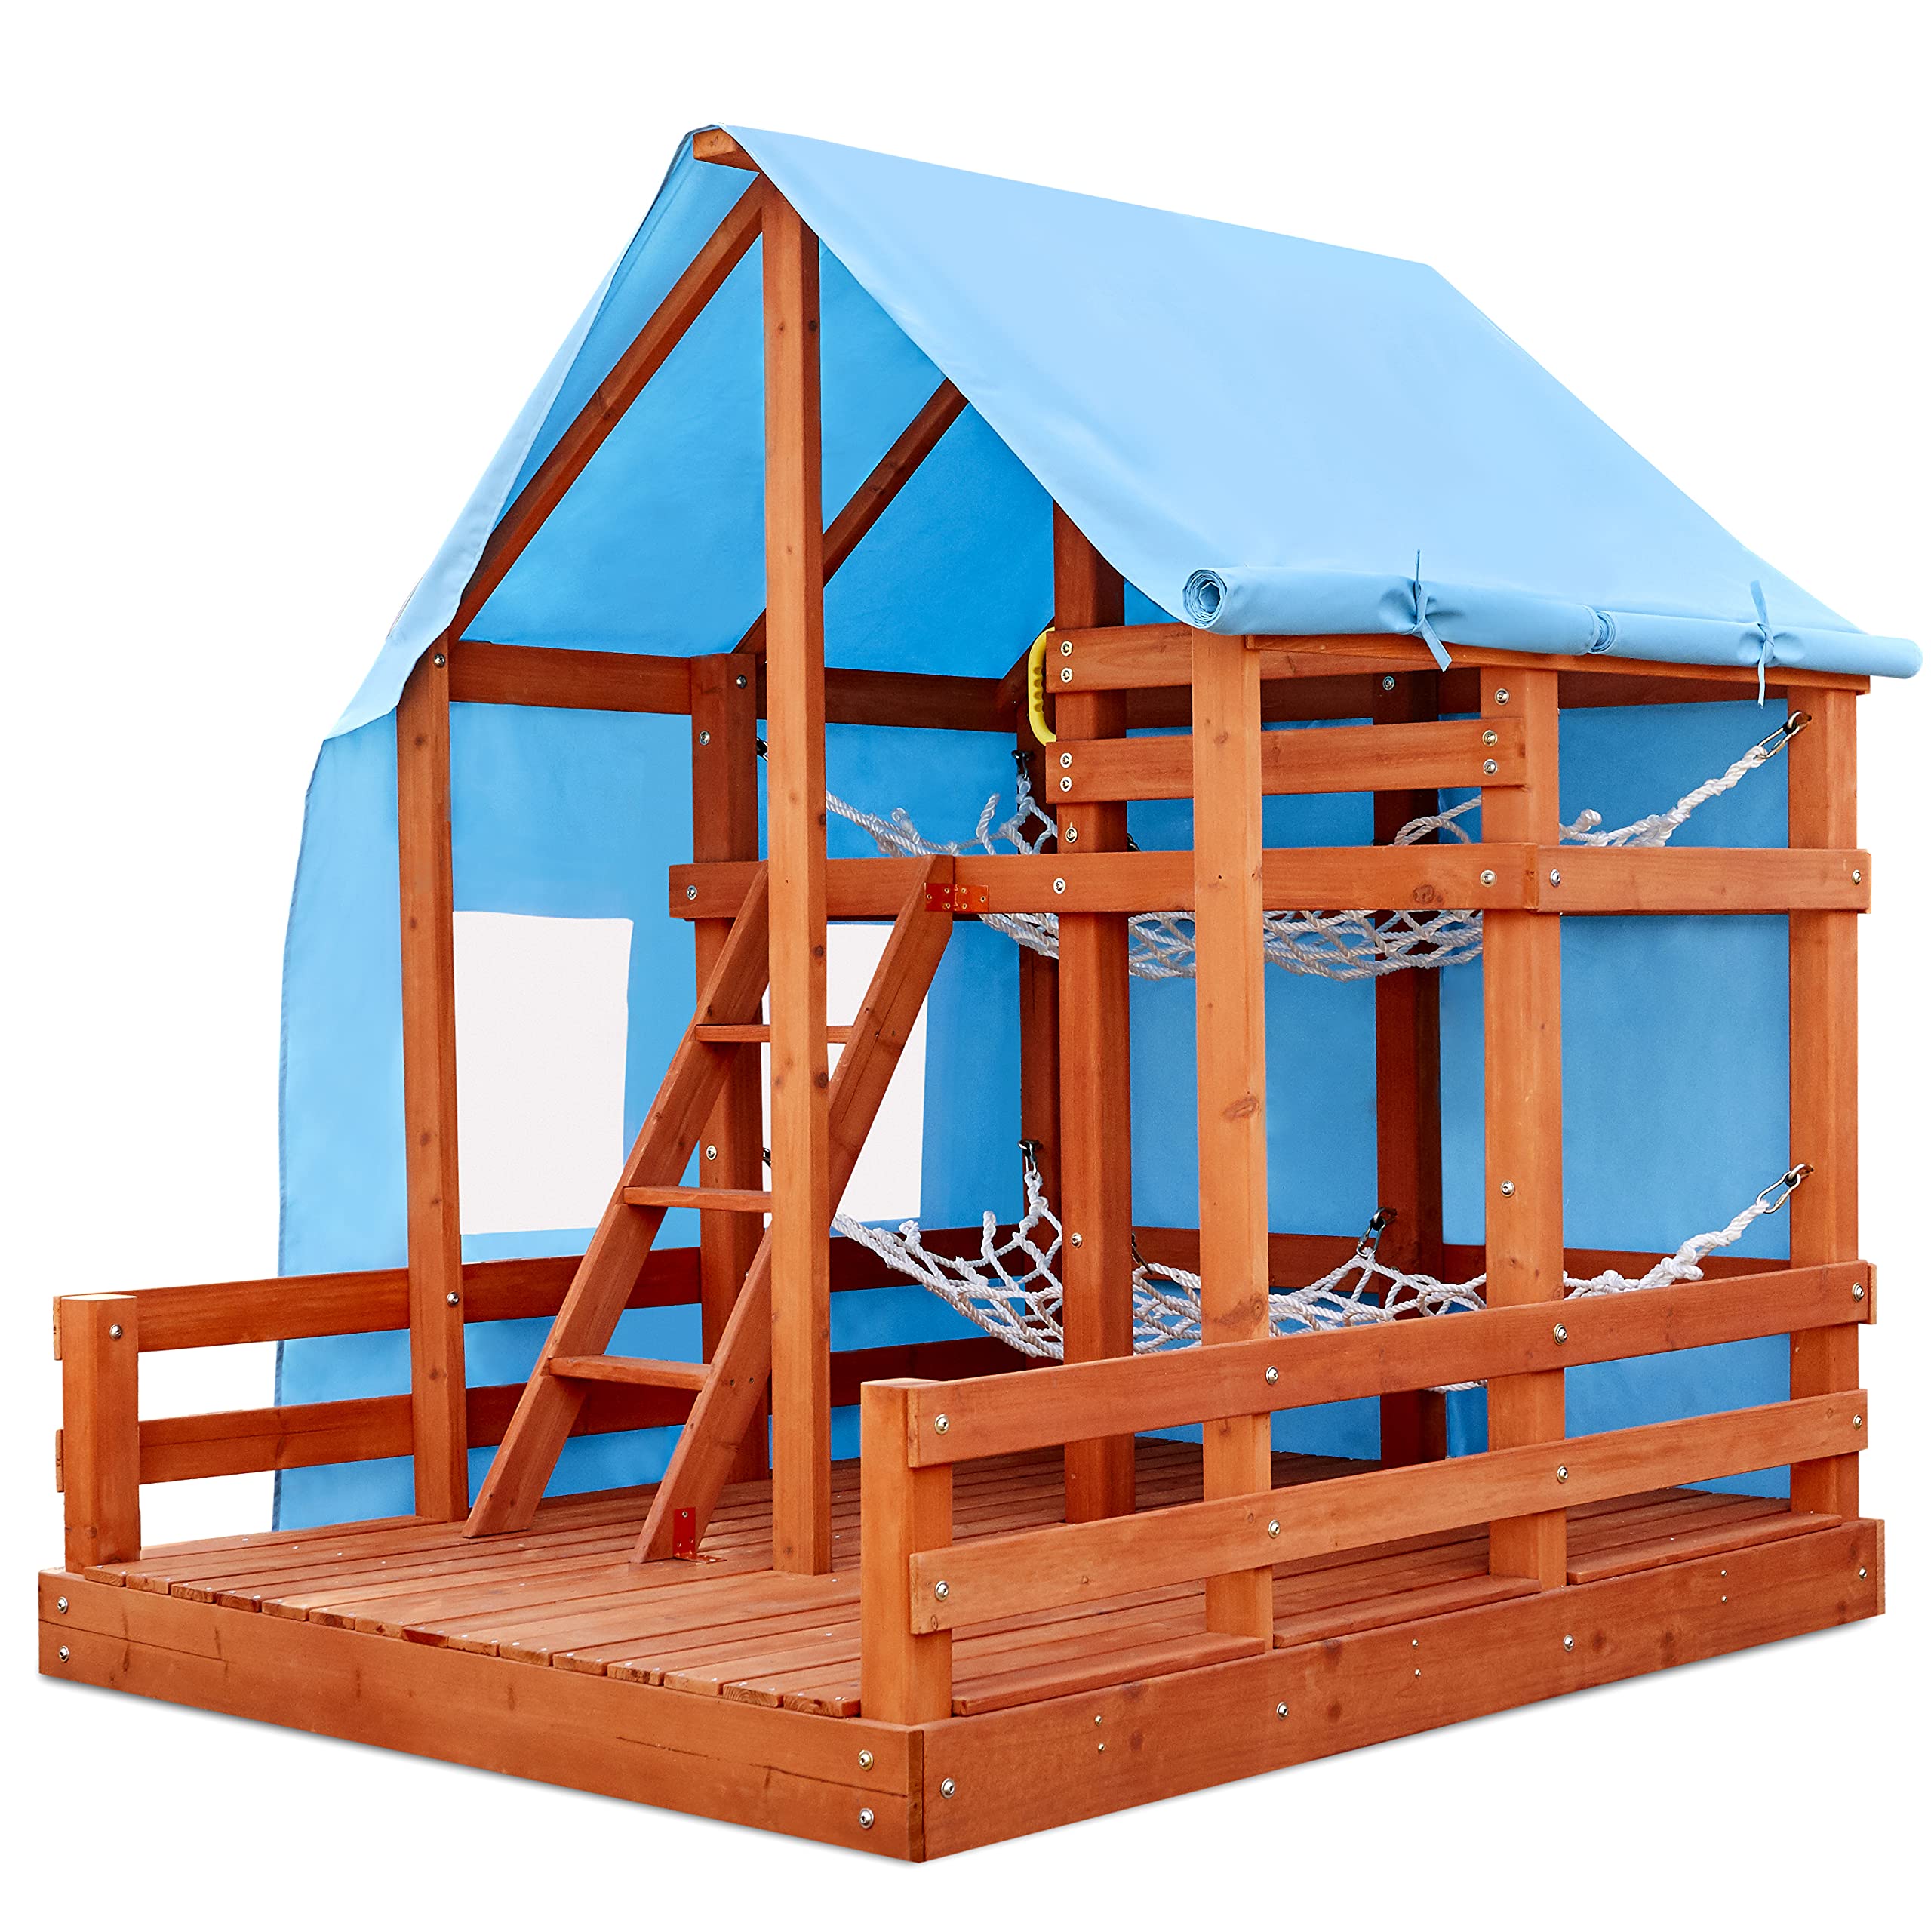 Little Tikes Real Wood Adventures Outdoor glamping House, Backyard Bungalow Fun, Up to 5 Kids, 2 Bunk Hammocks, Outdoor Lights,